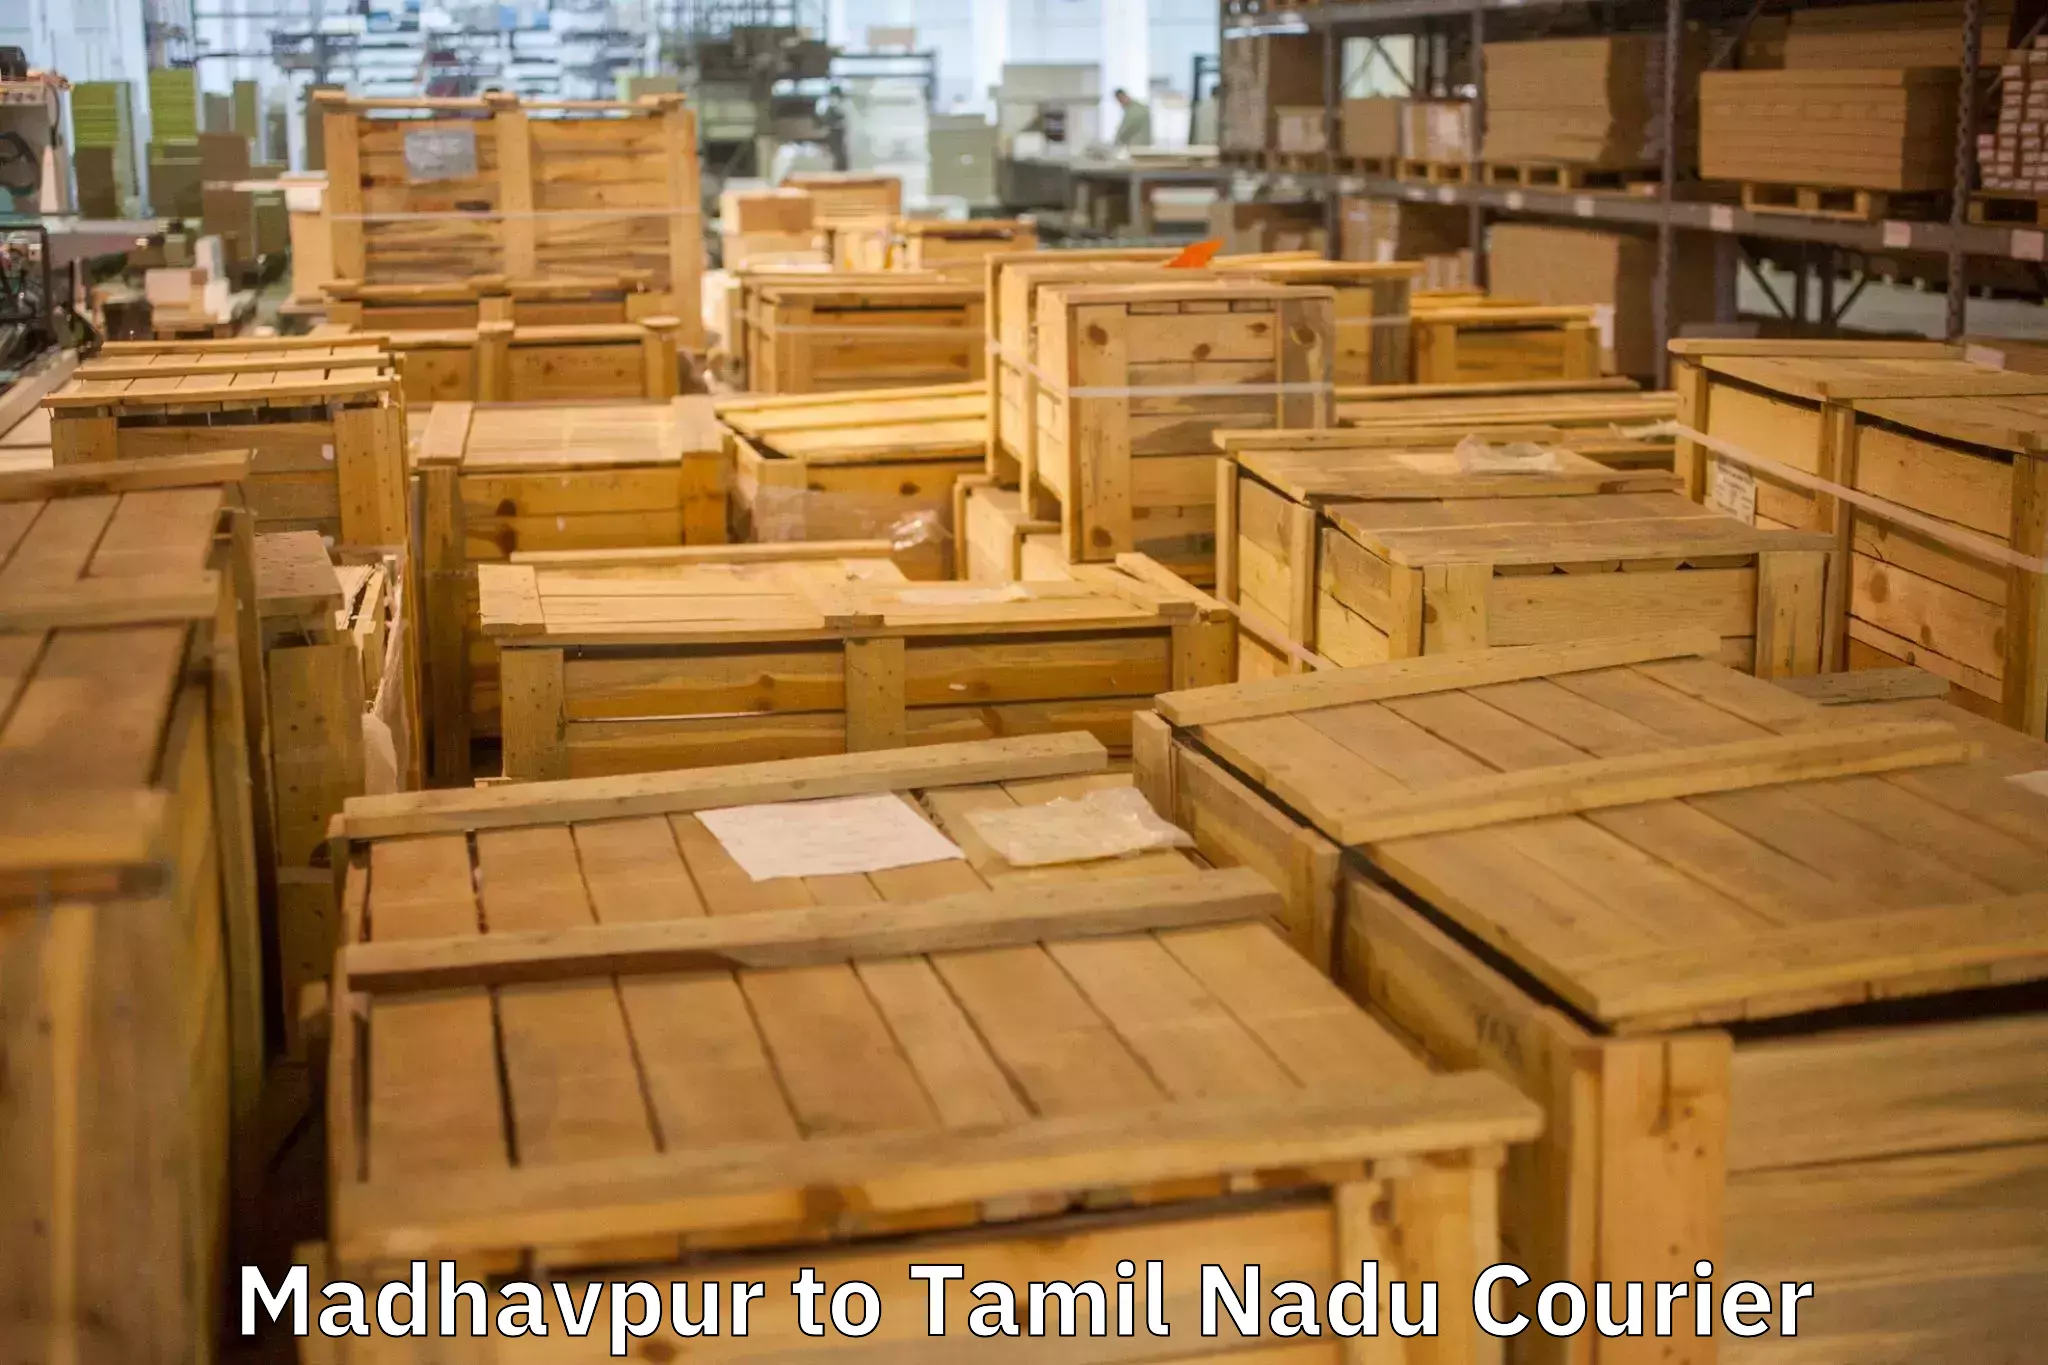 Home relocation experts Madhavpur to Polur